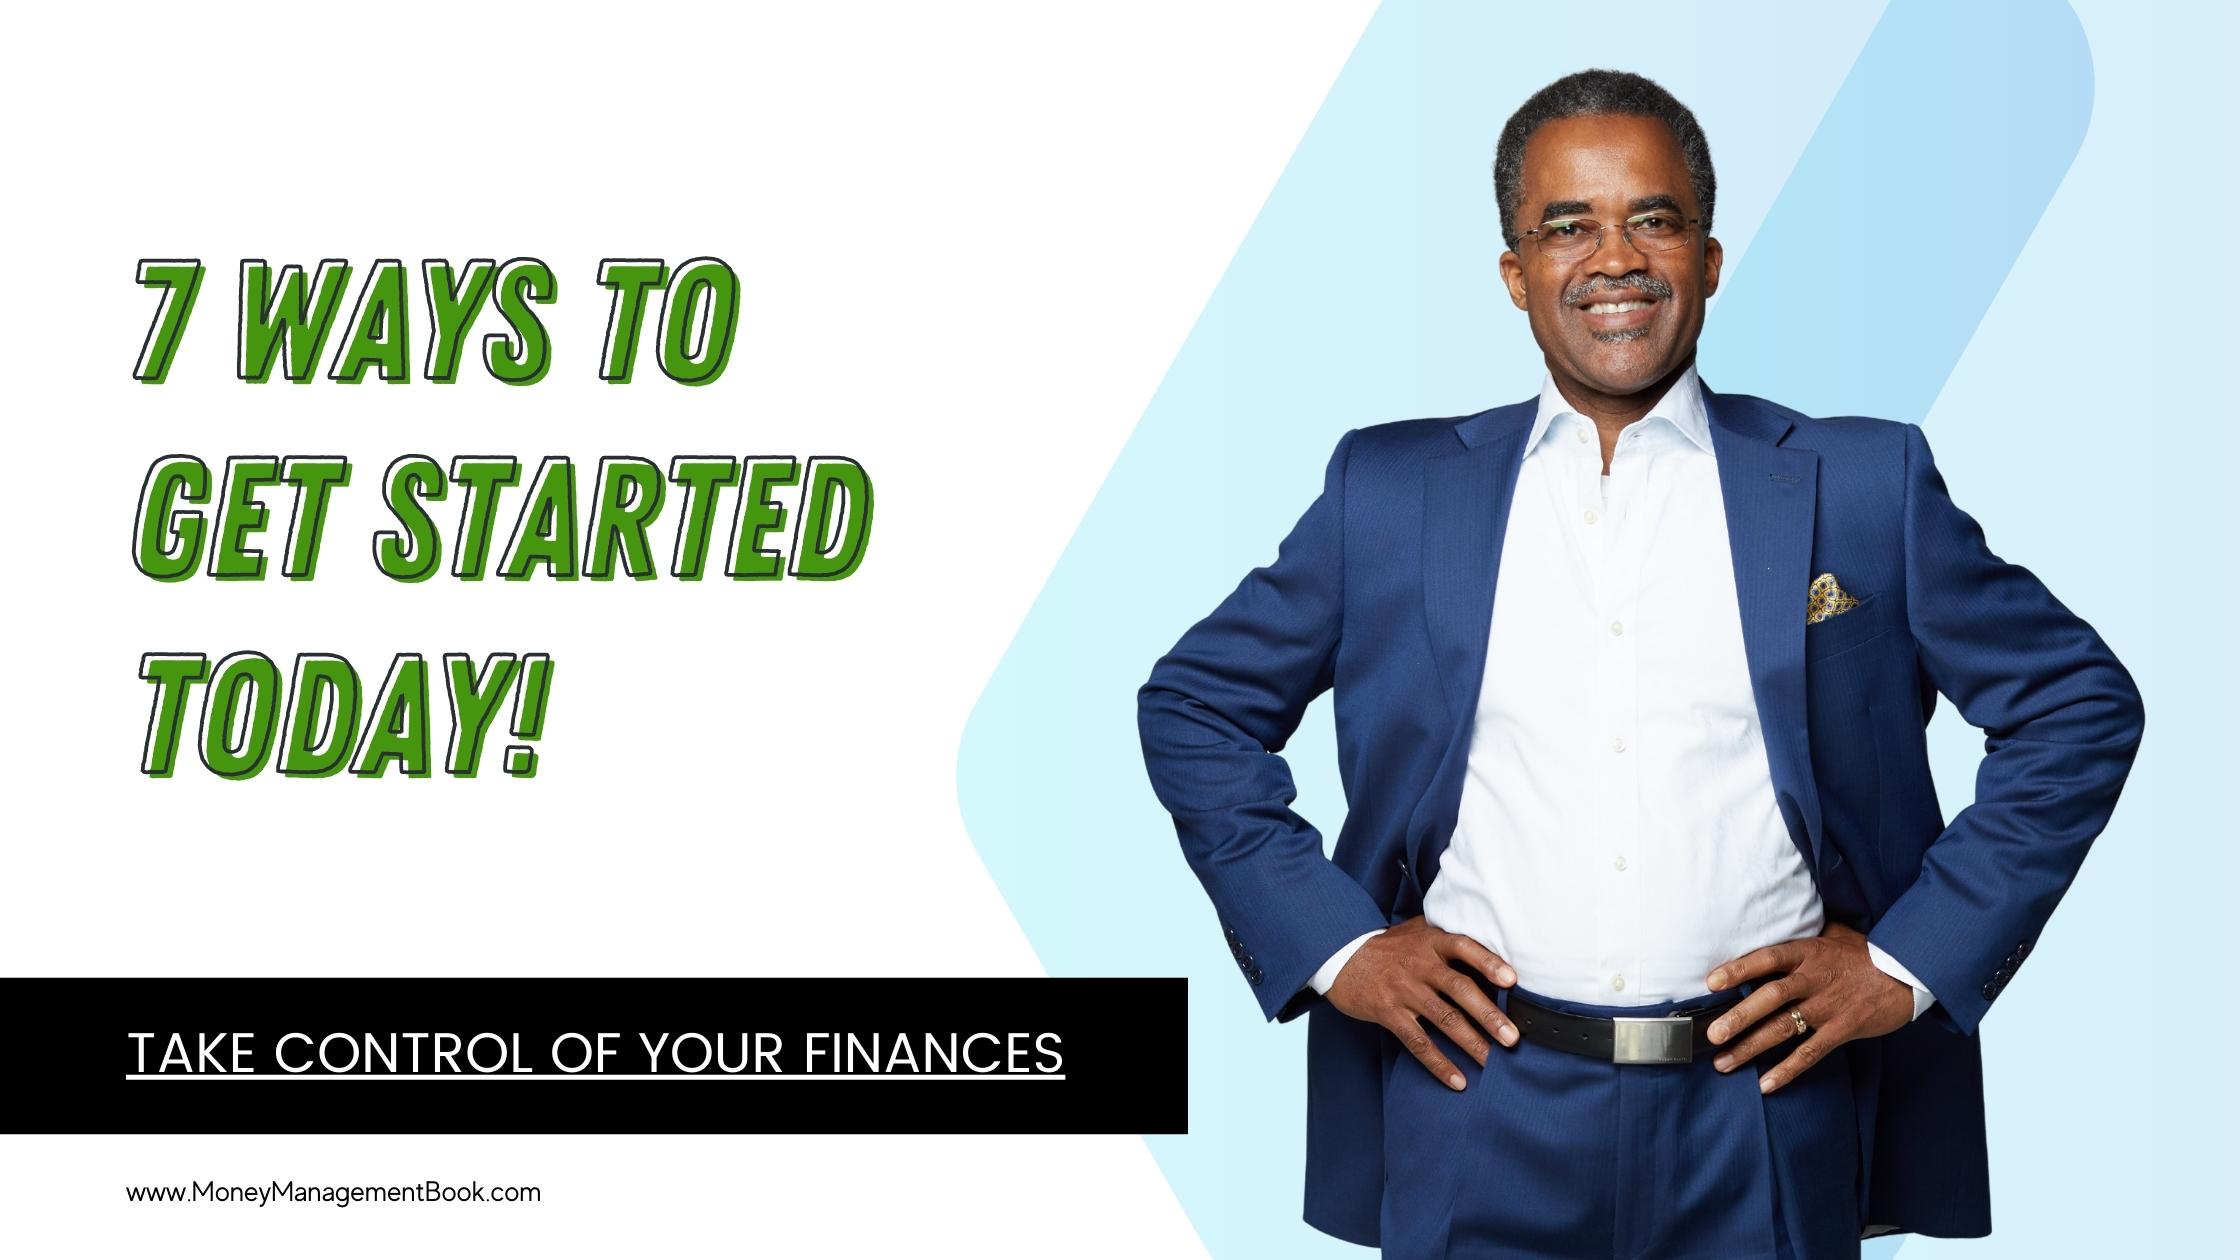 7 ways to take control of your finances